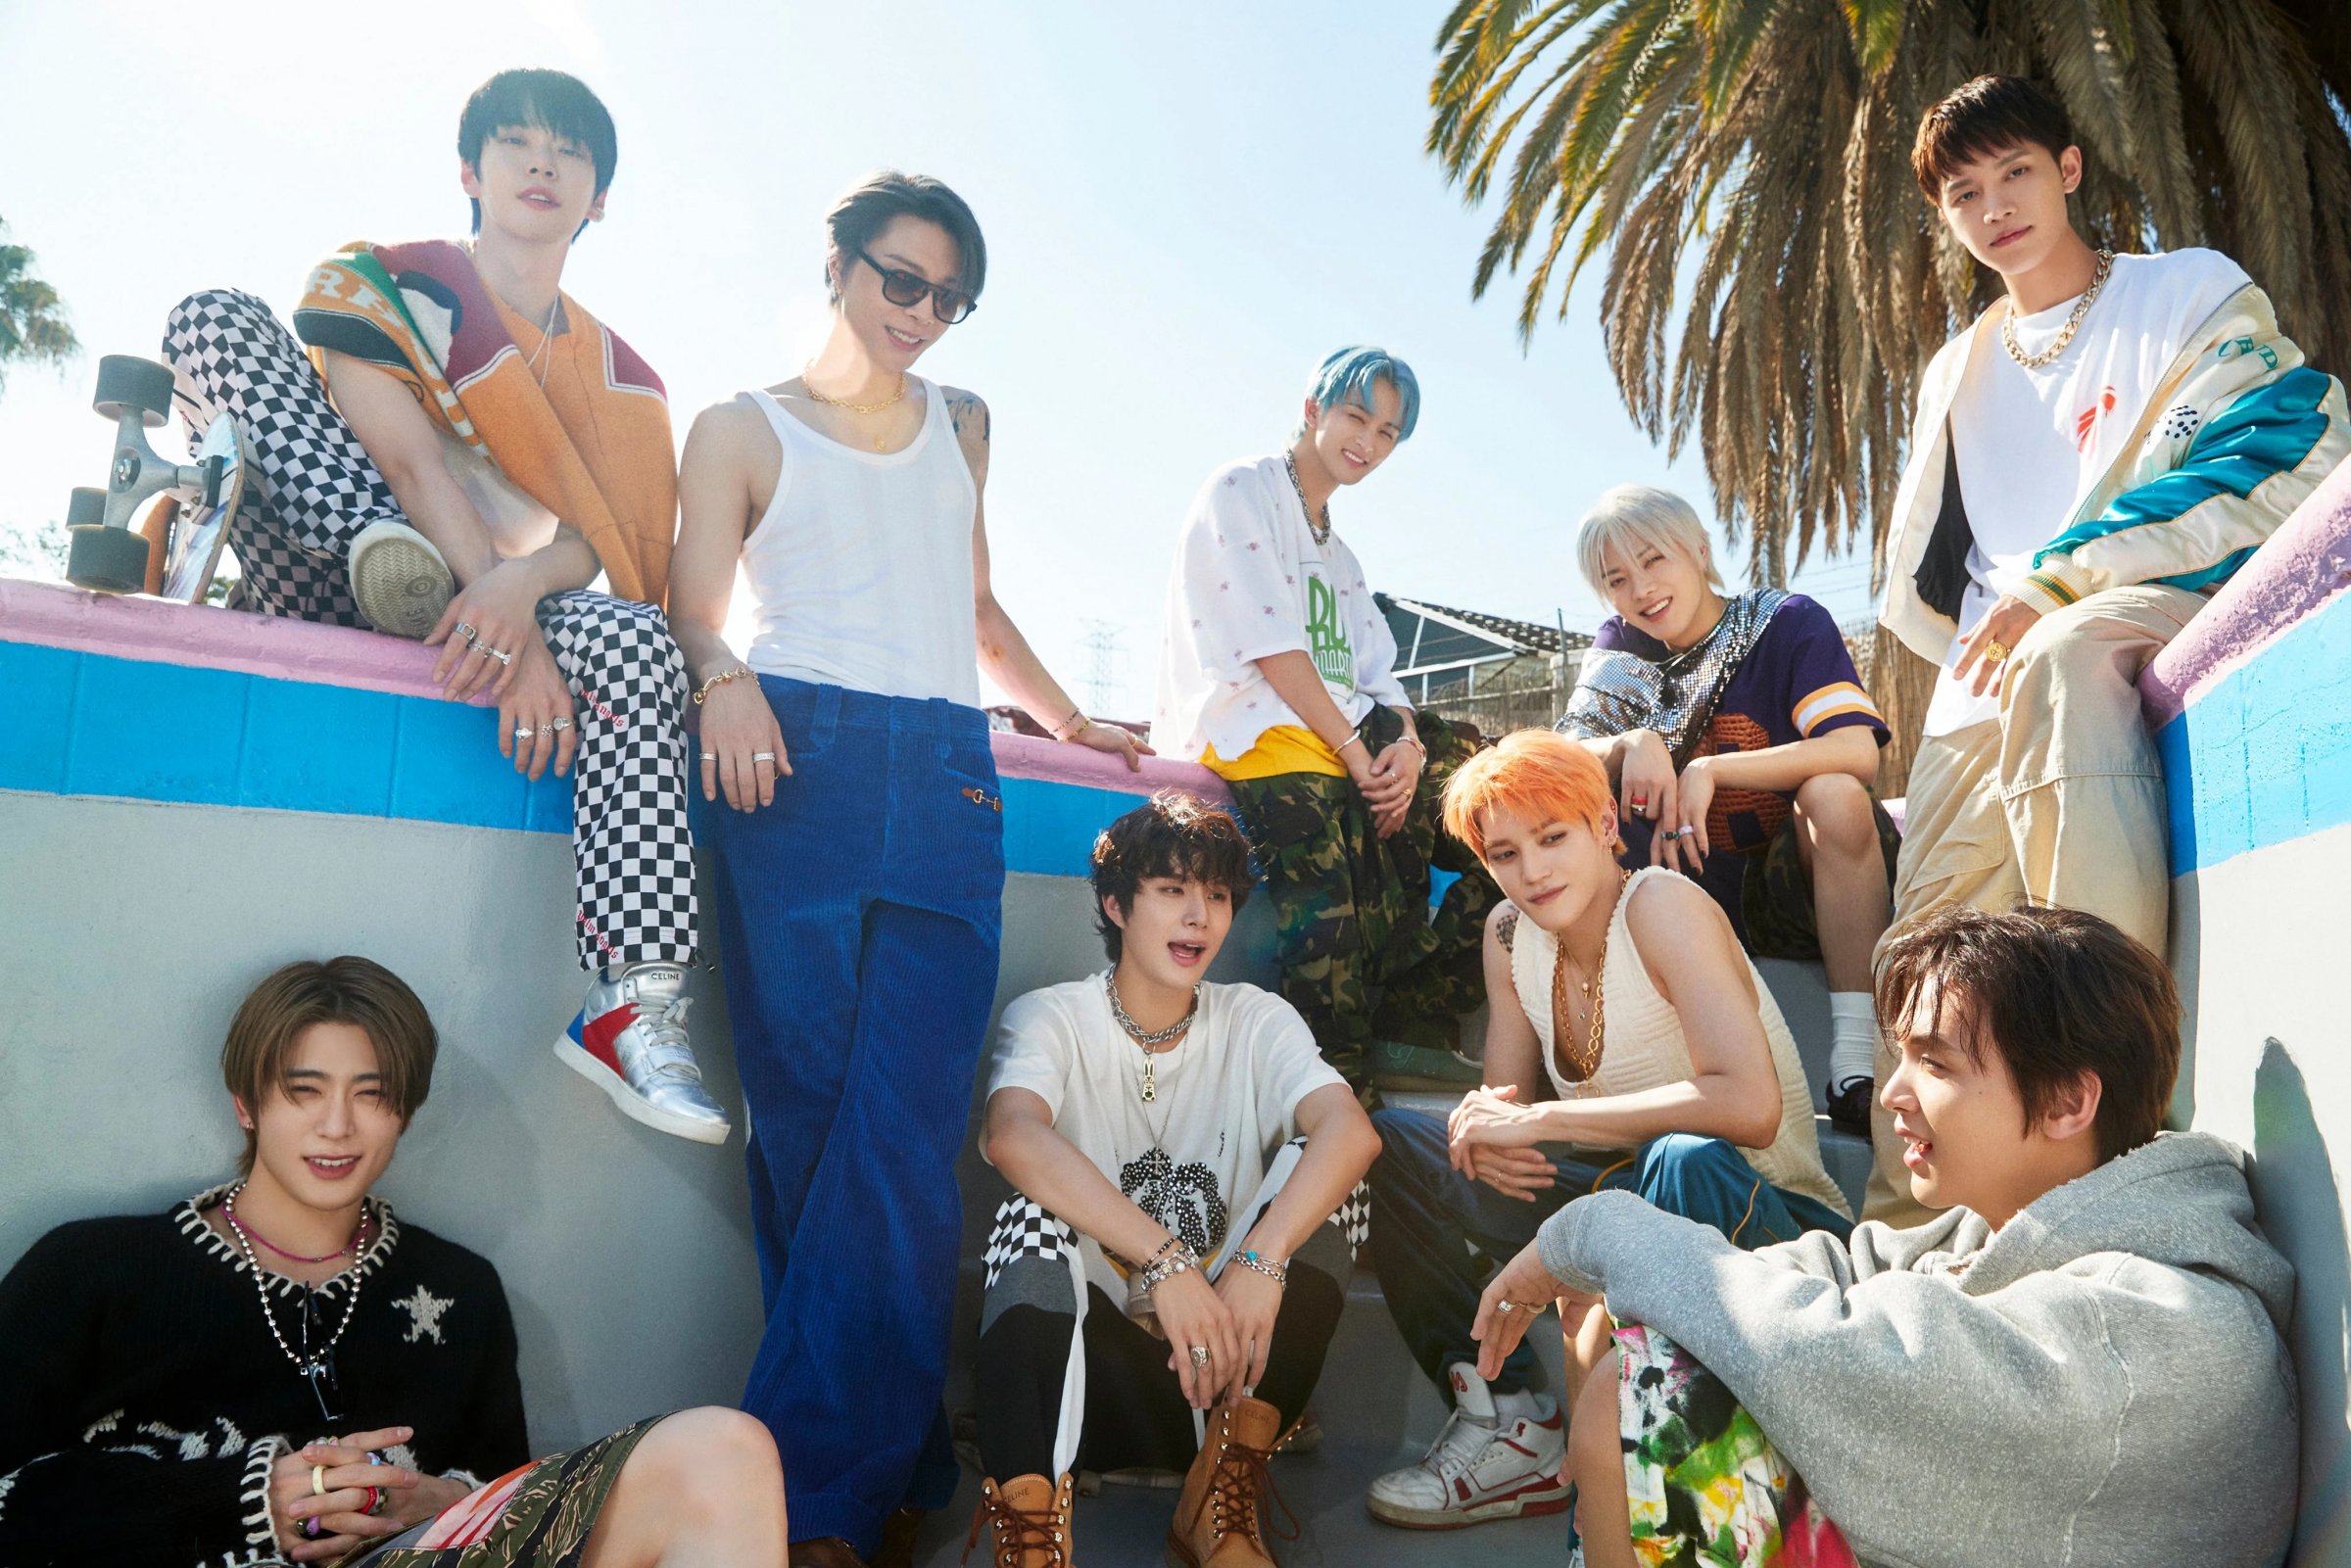 NCT 127 Spend A Warm Day In The Sun In The New Group Teaser Photo For Their 4th Album Repackage 'Ay Yo'